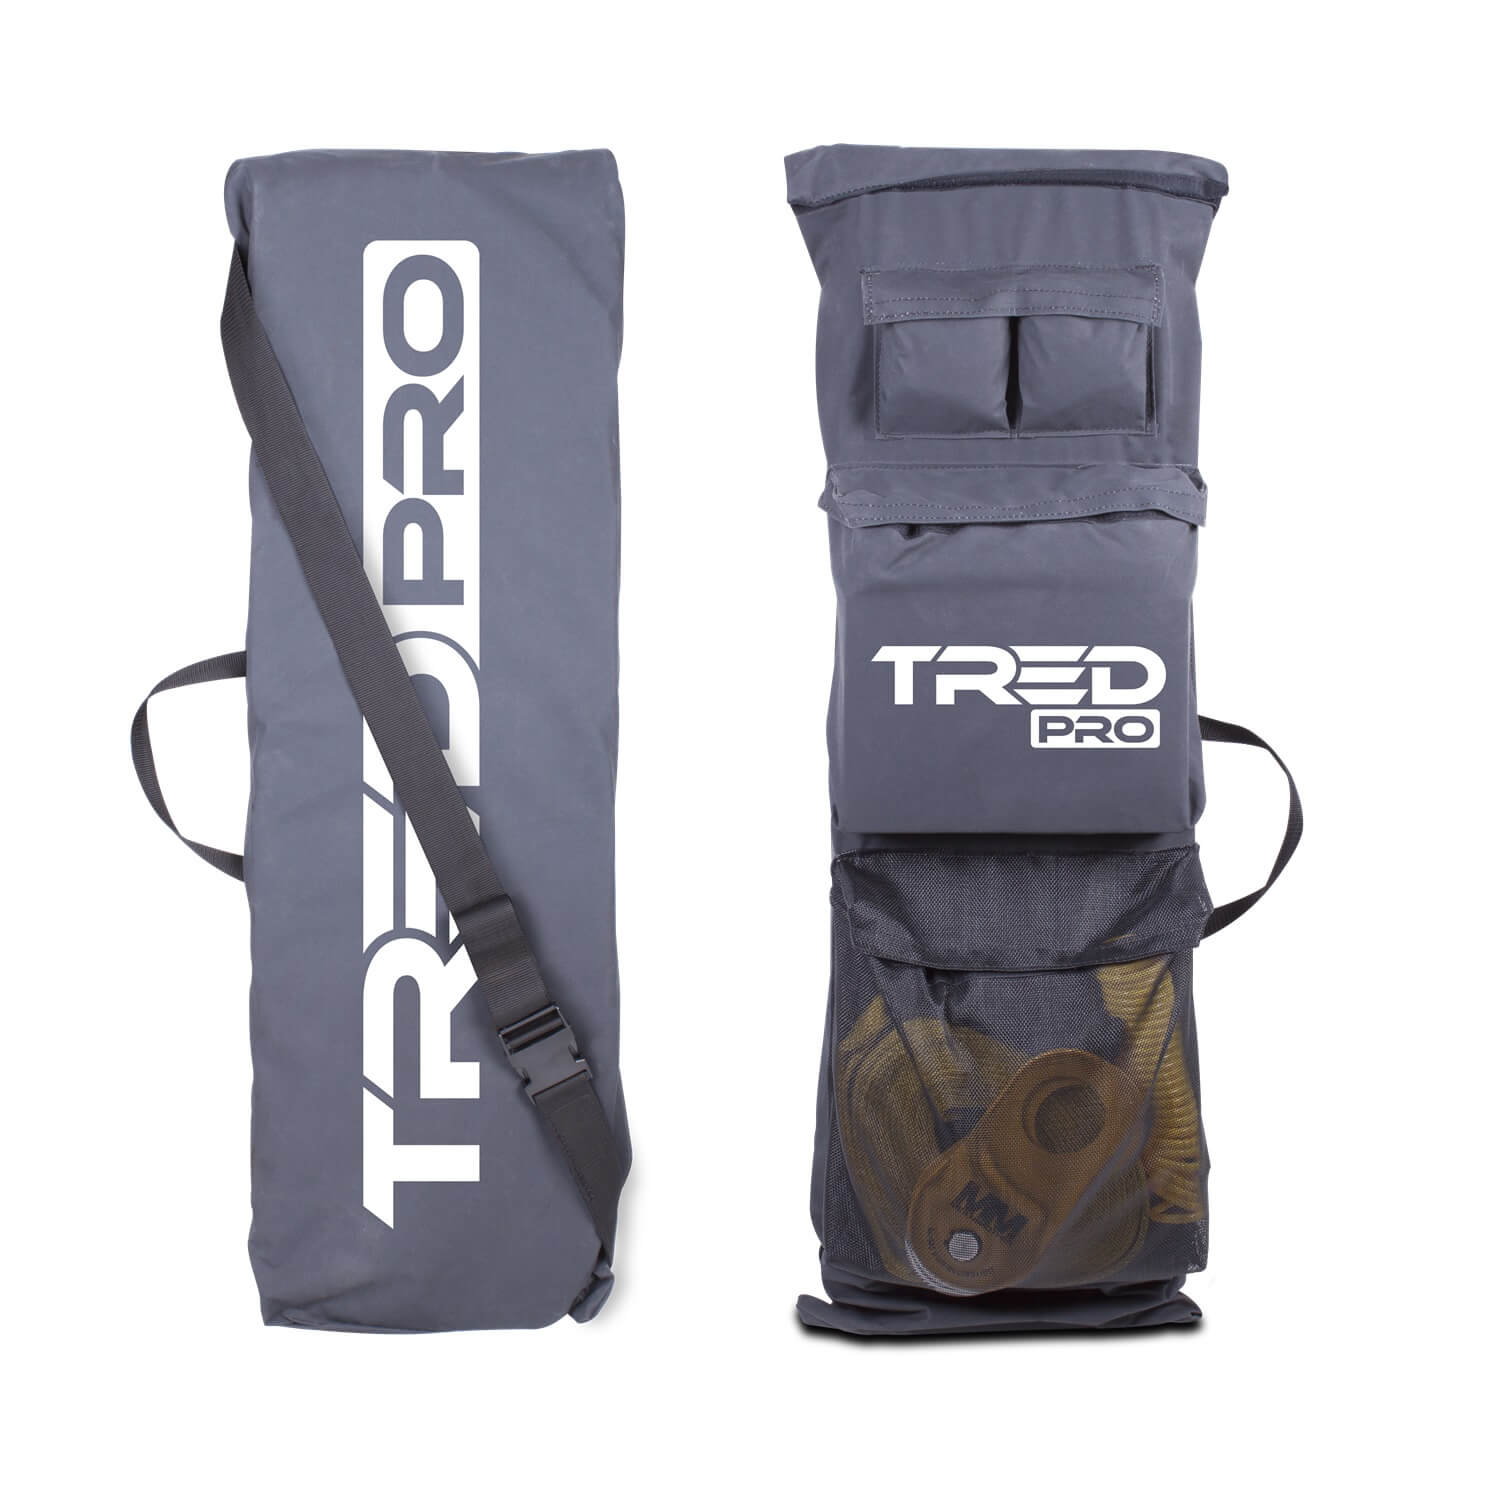 ARB TRED PRO Recovery Board Carry Bag TPBAG